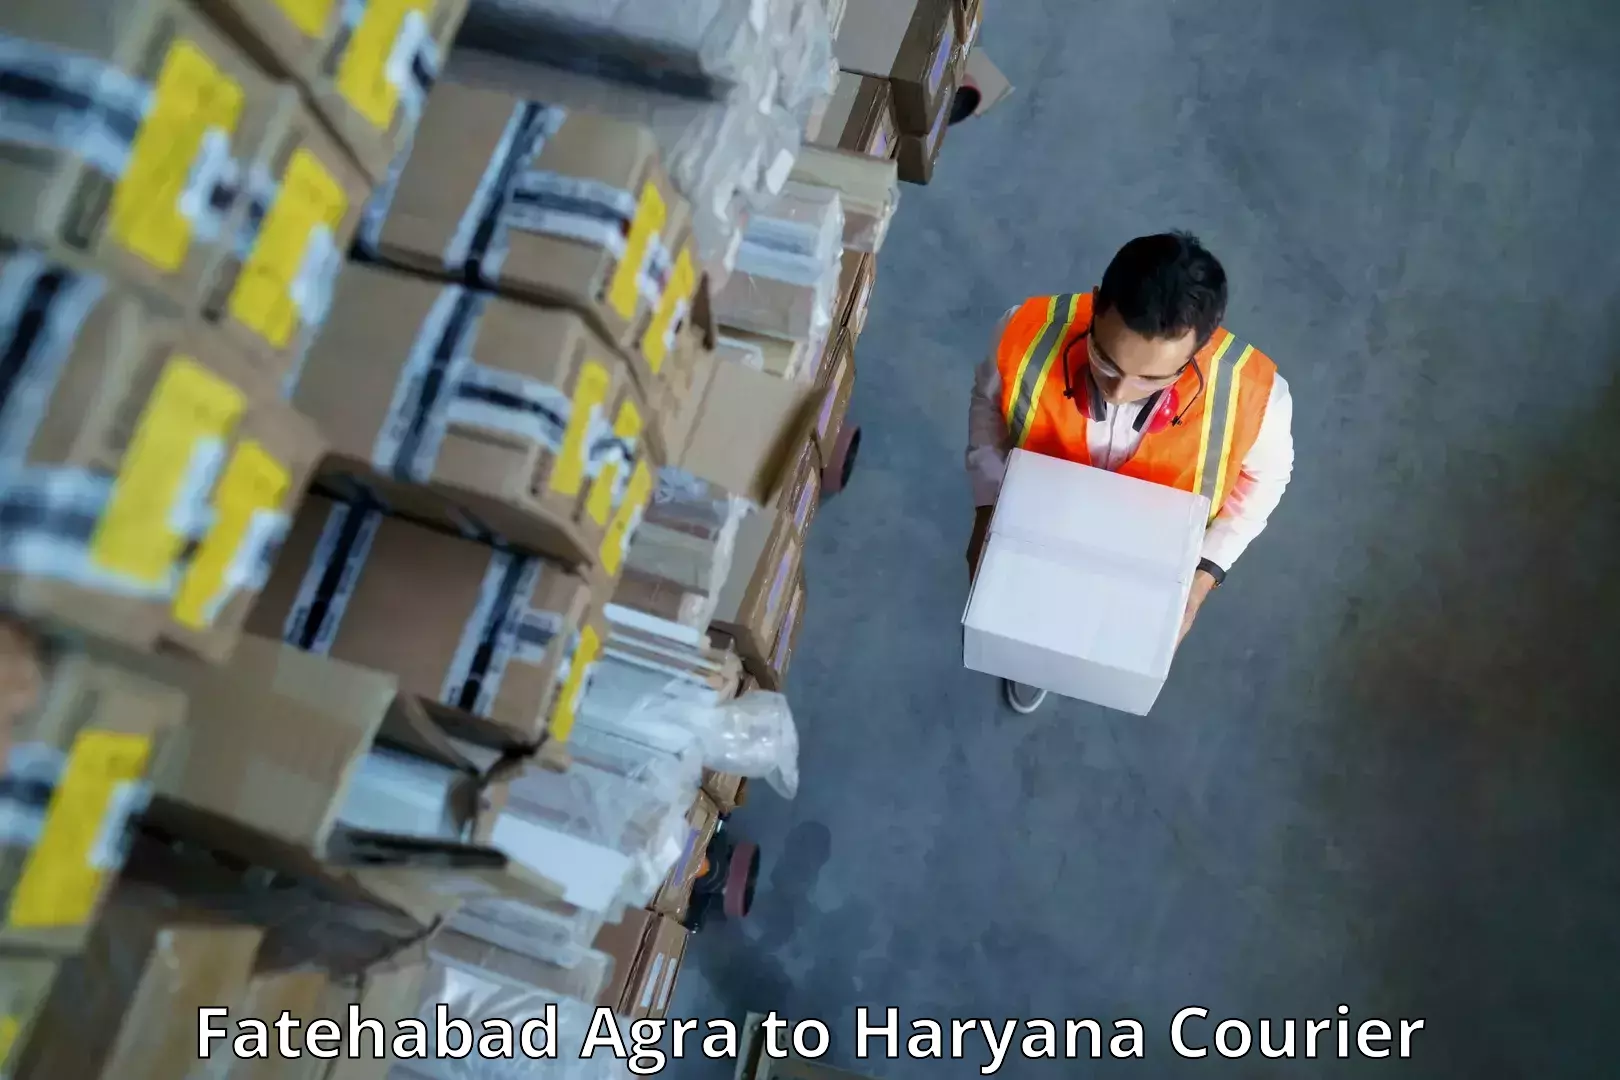 High-speed delivery in Fatehabad Agra to Charkhi Dadri